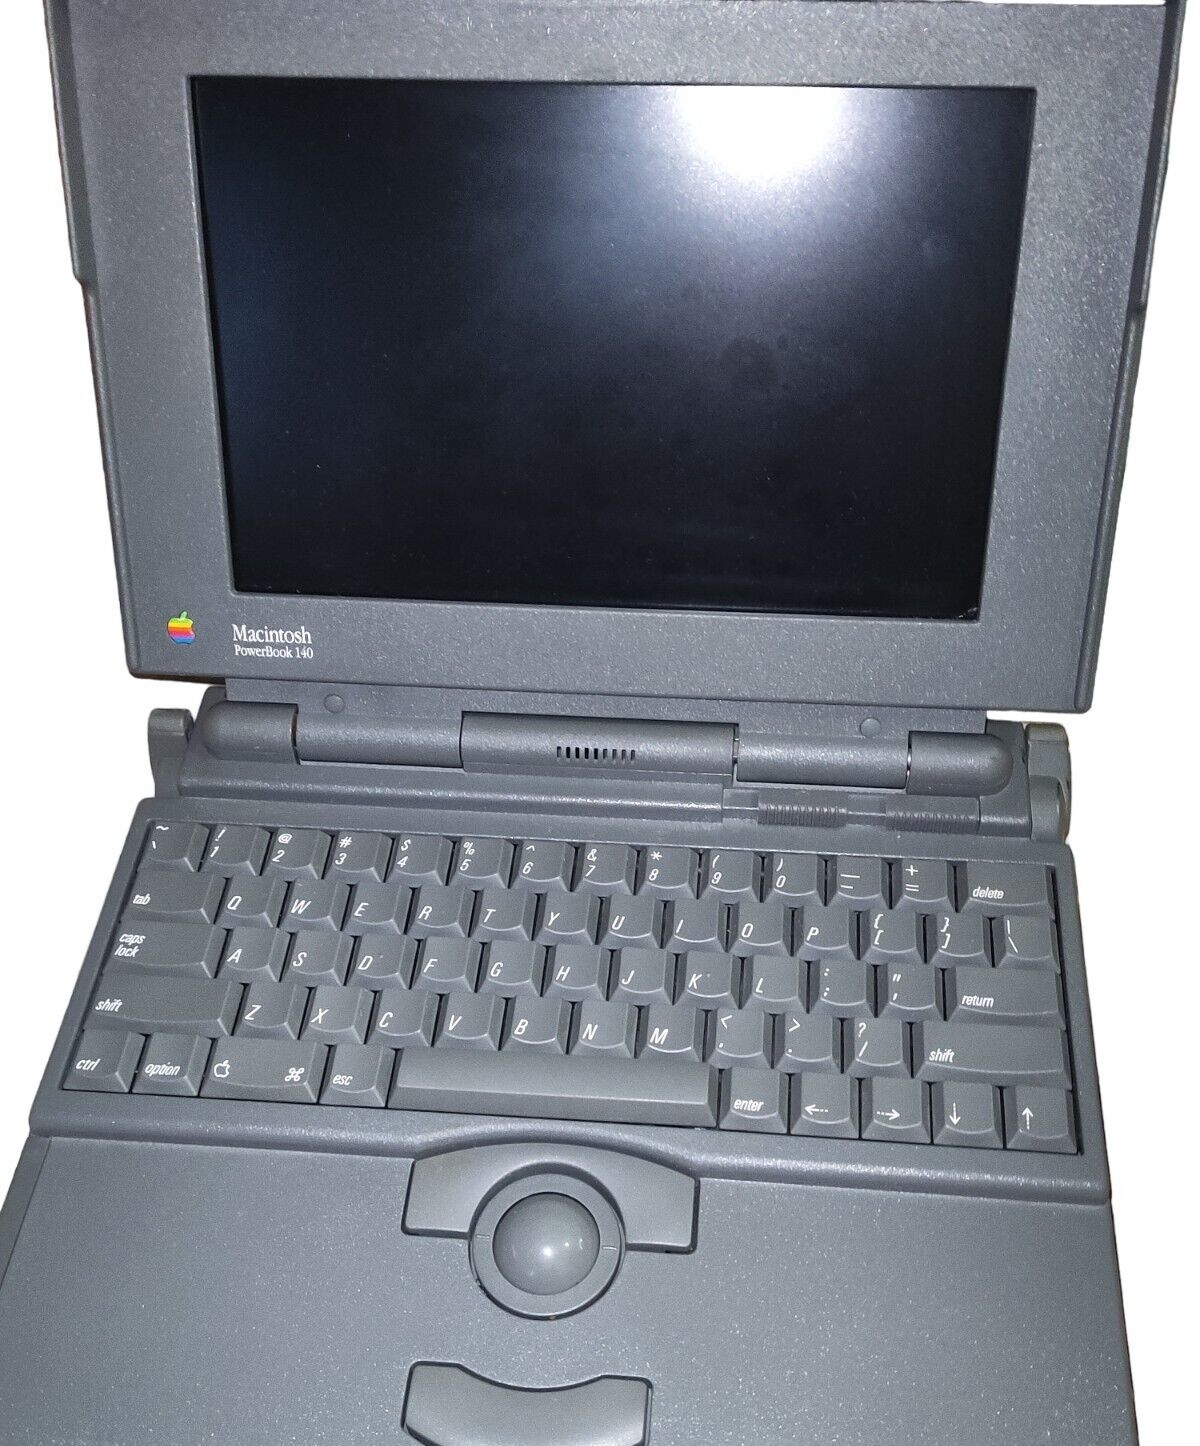 Apple Macintosh PowerBook 140 1991 used good condition. Some Missing Parts.